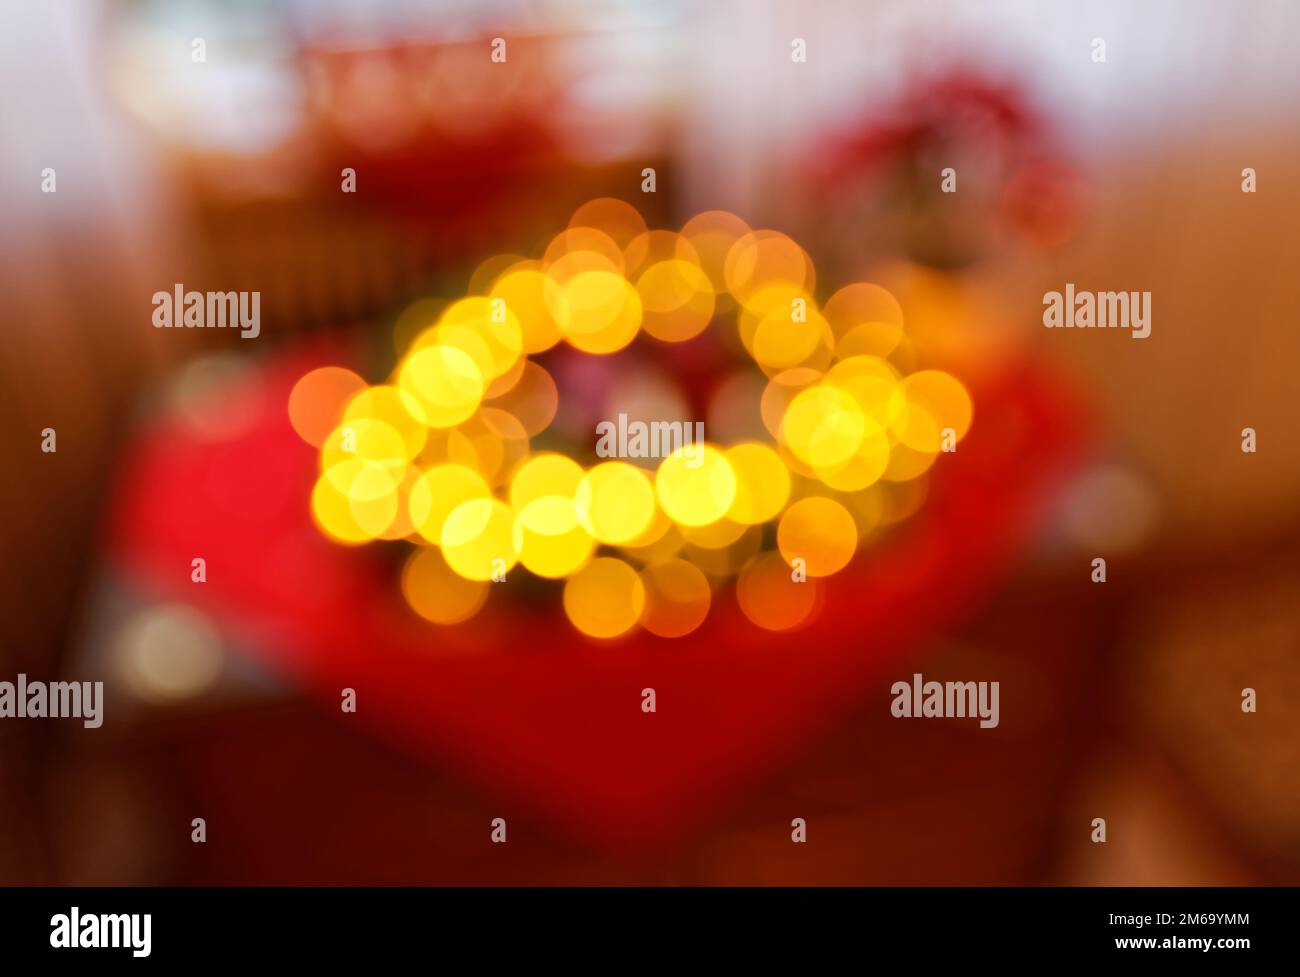 Christmas Wreath with yellow Fairy Lights and red Advent Candles Extremely Blurred Background Stock Photo